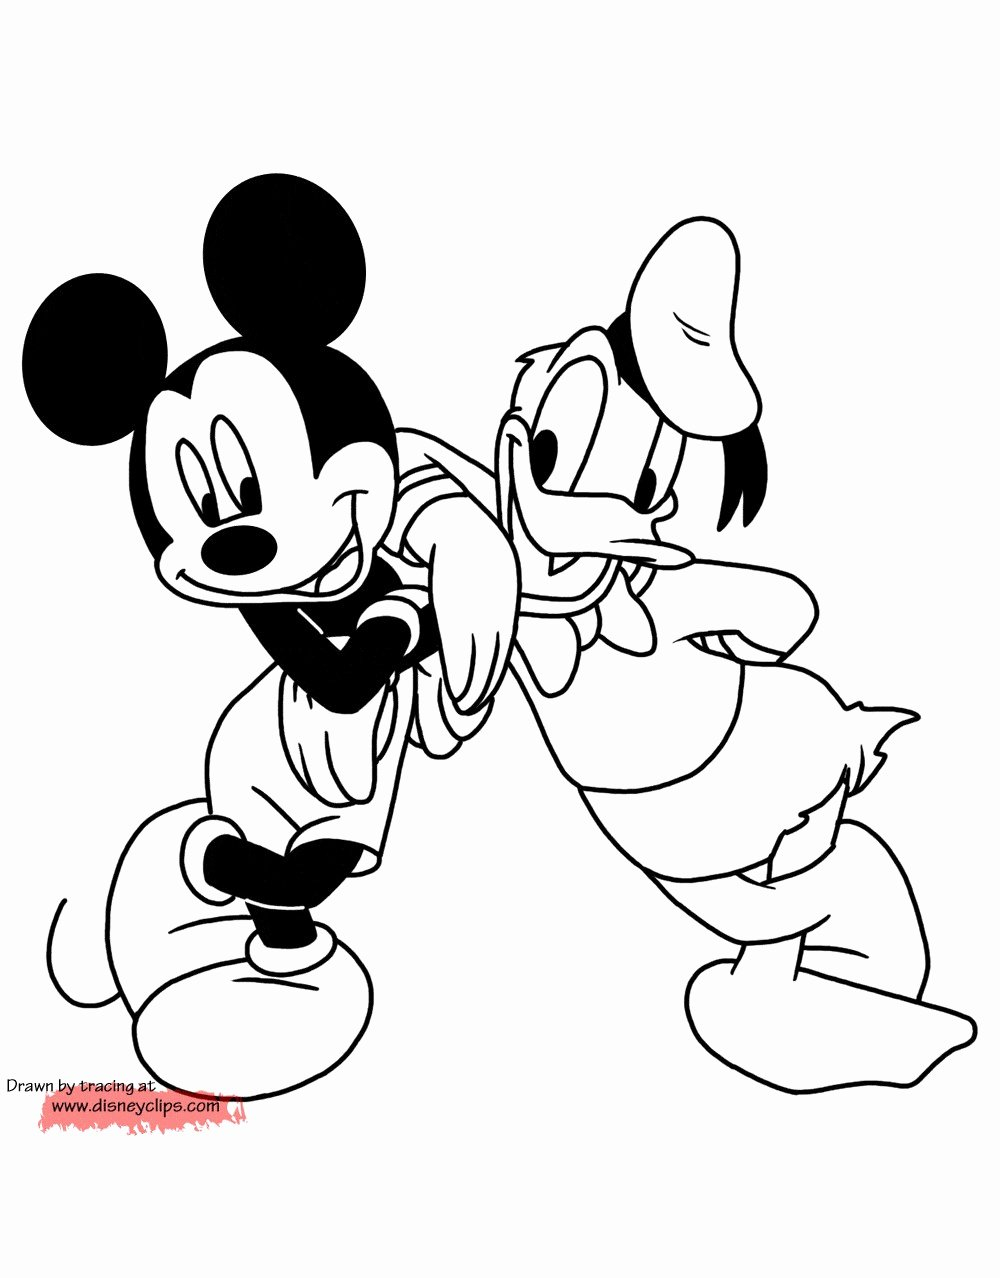 Mickey Mouse And Minnie Coloring Pages Coloring Pages Of Mickey Mouse And Minnie Coloringpw